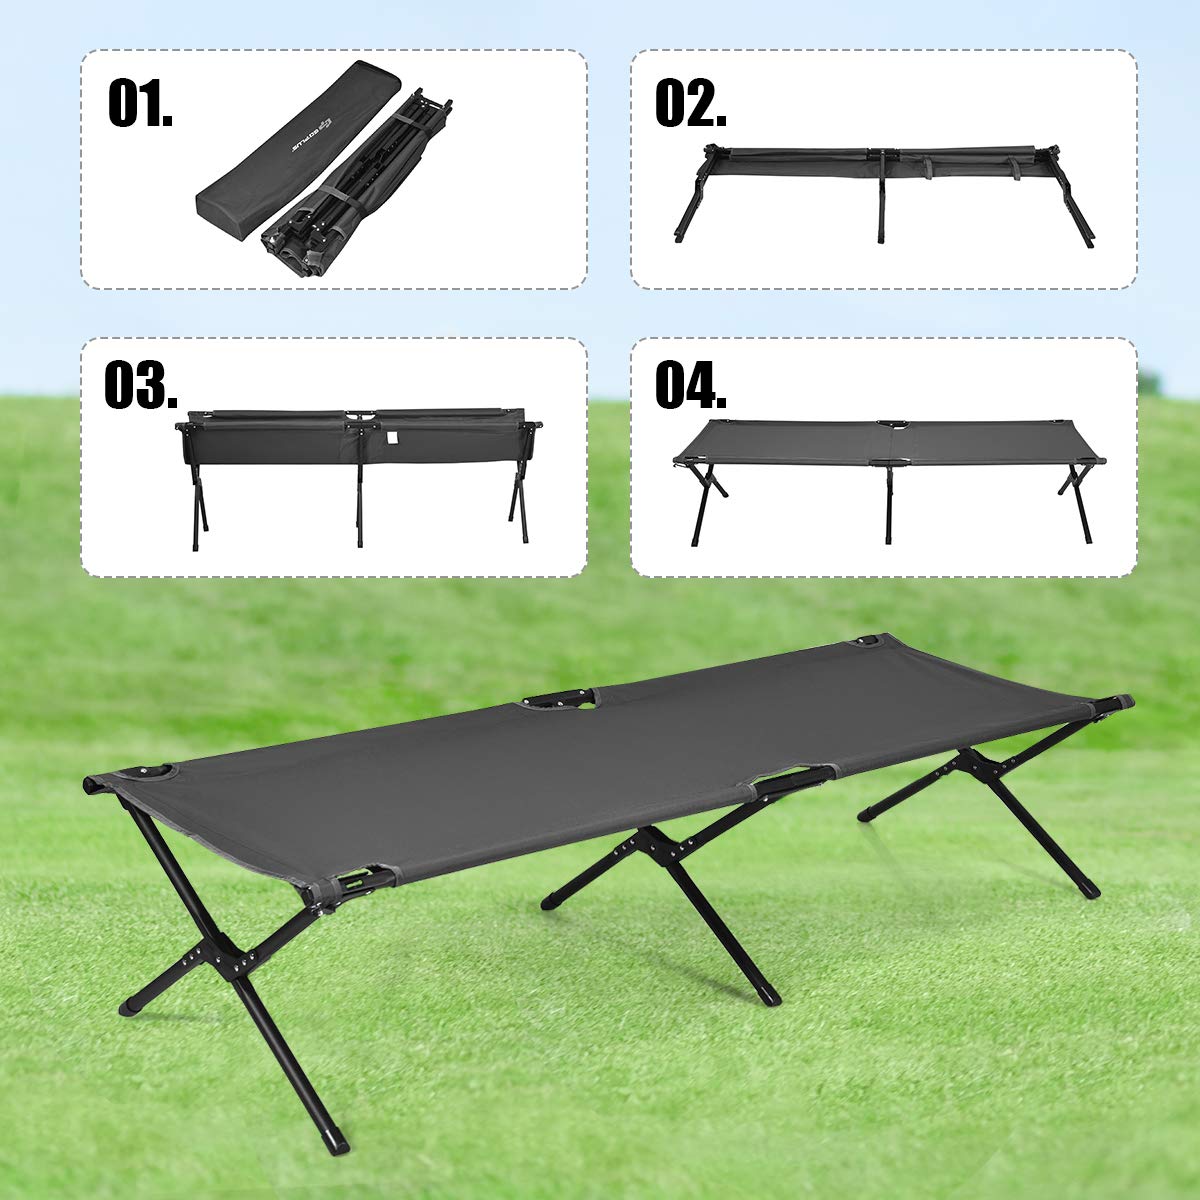 Folding Camping Cot with Carrying Bag